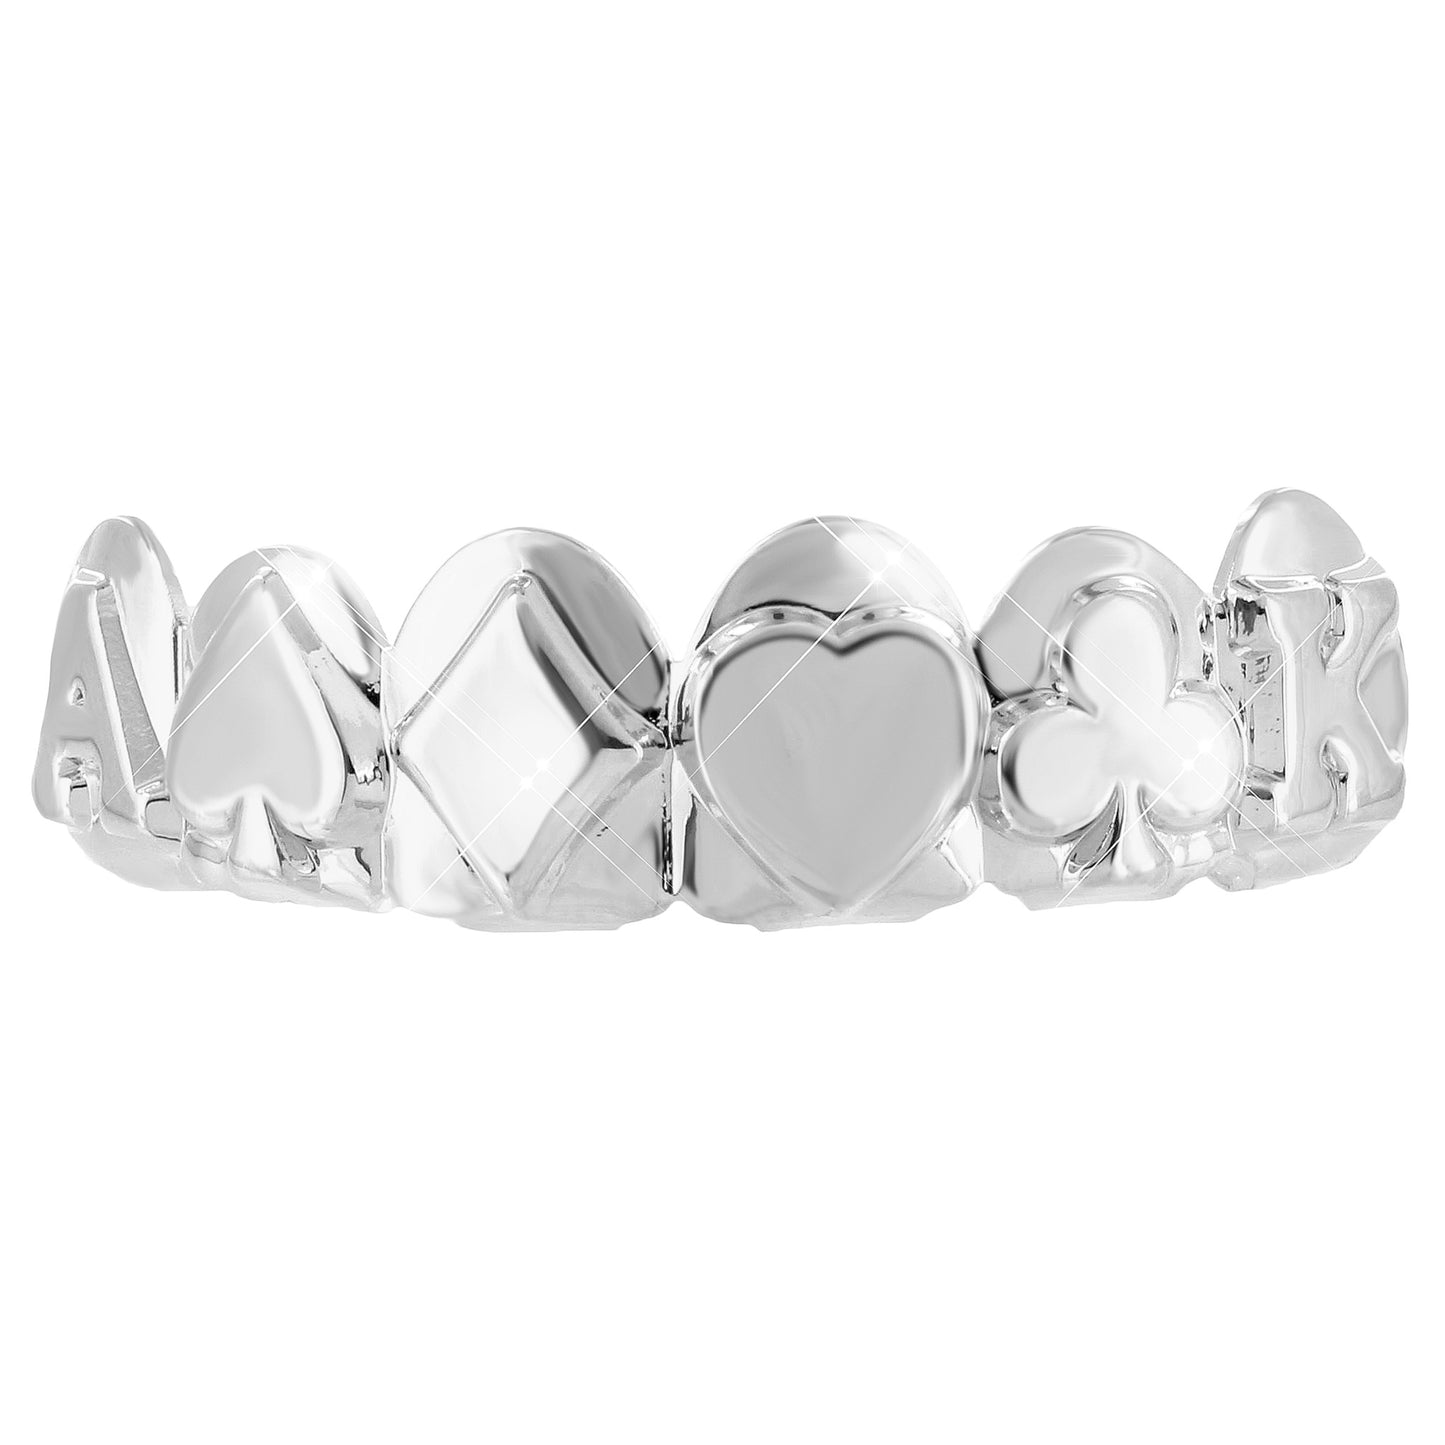 Ace Design Top Teeth White Gold Finish Grillz